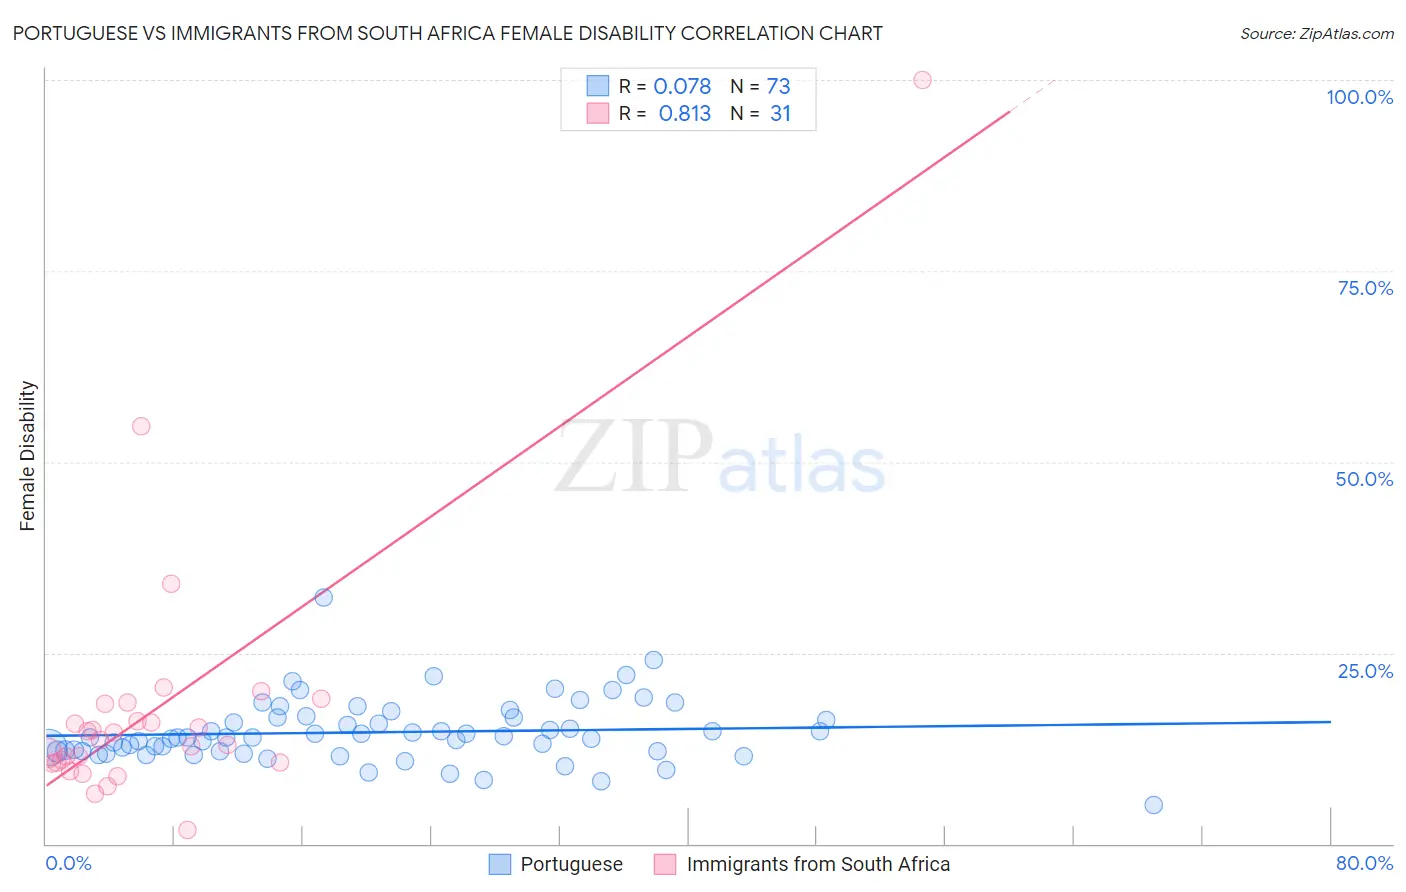 Portuguese vs Immigrants from South Africa Female Disability